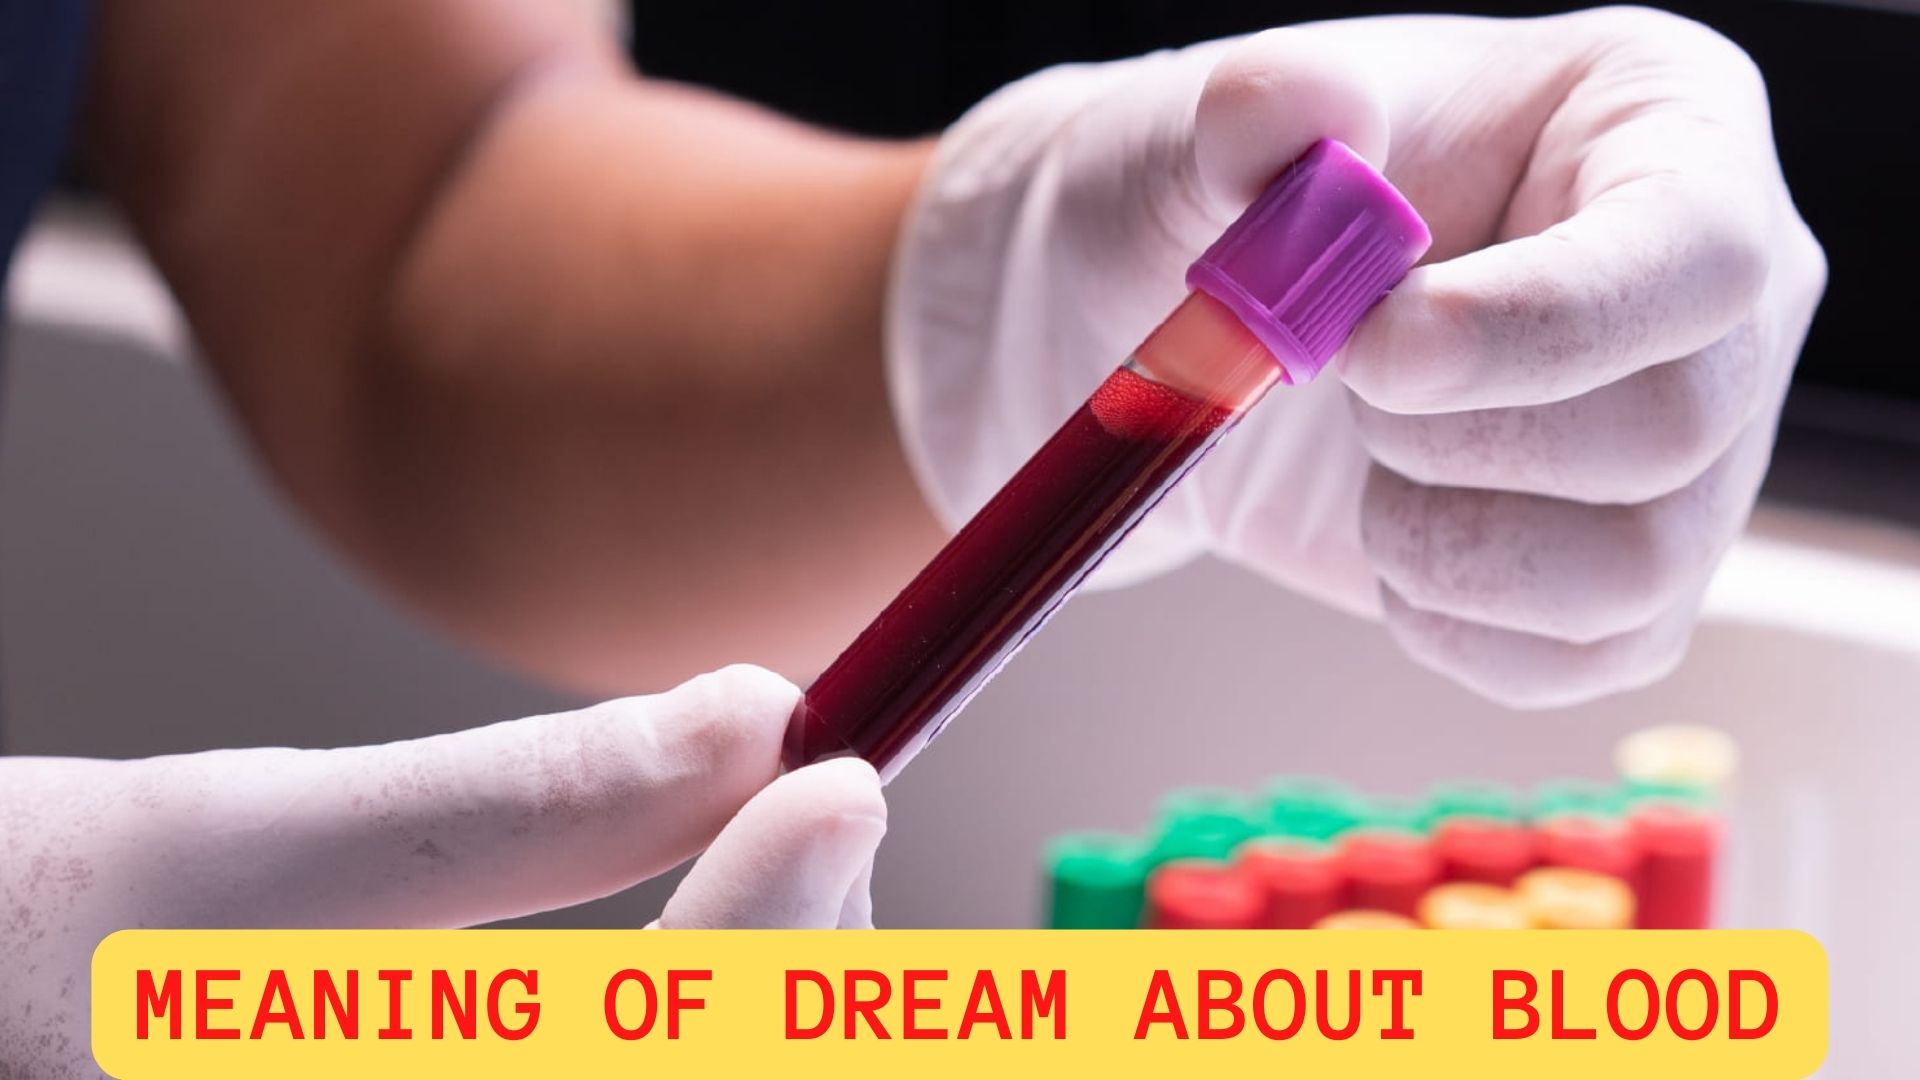 Meaning Of Dream About Blood - Represents Vitality And Life Force